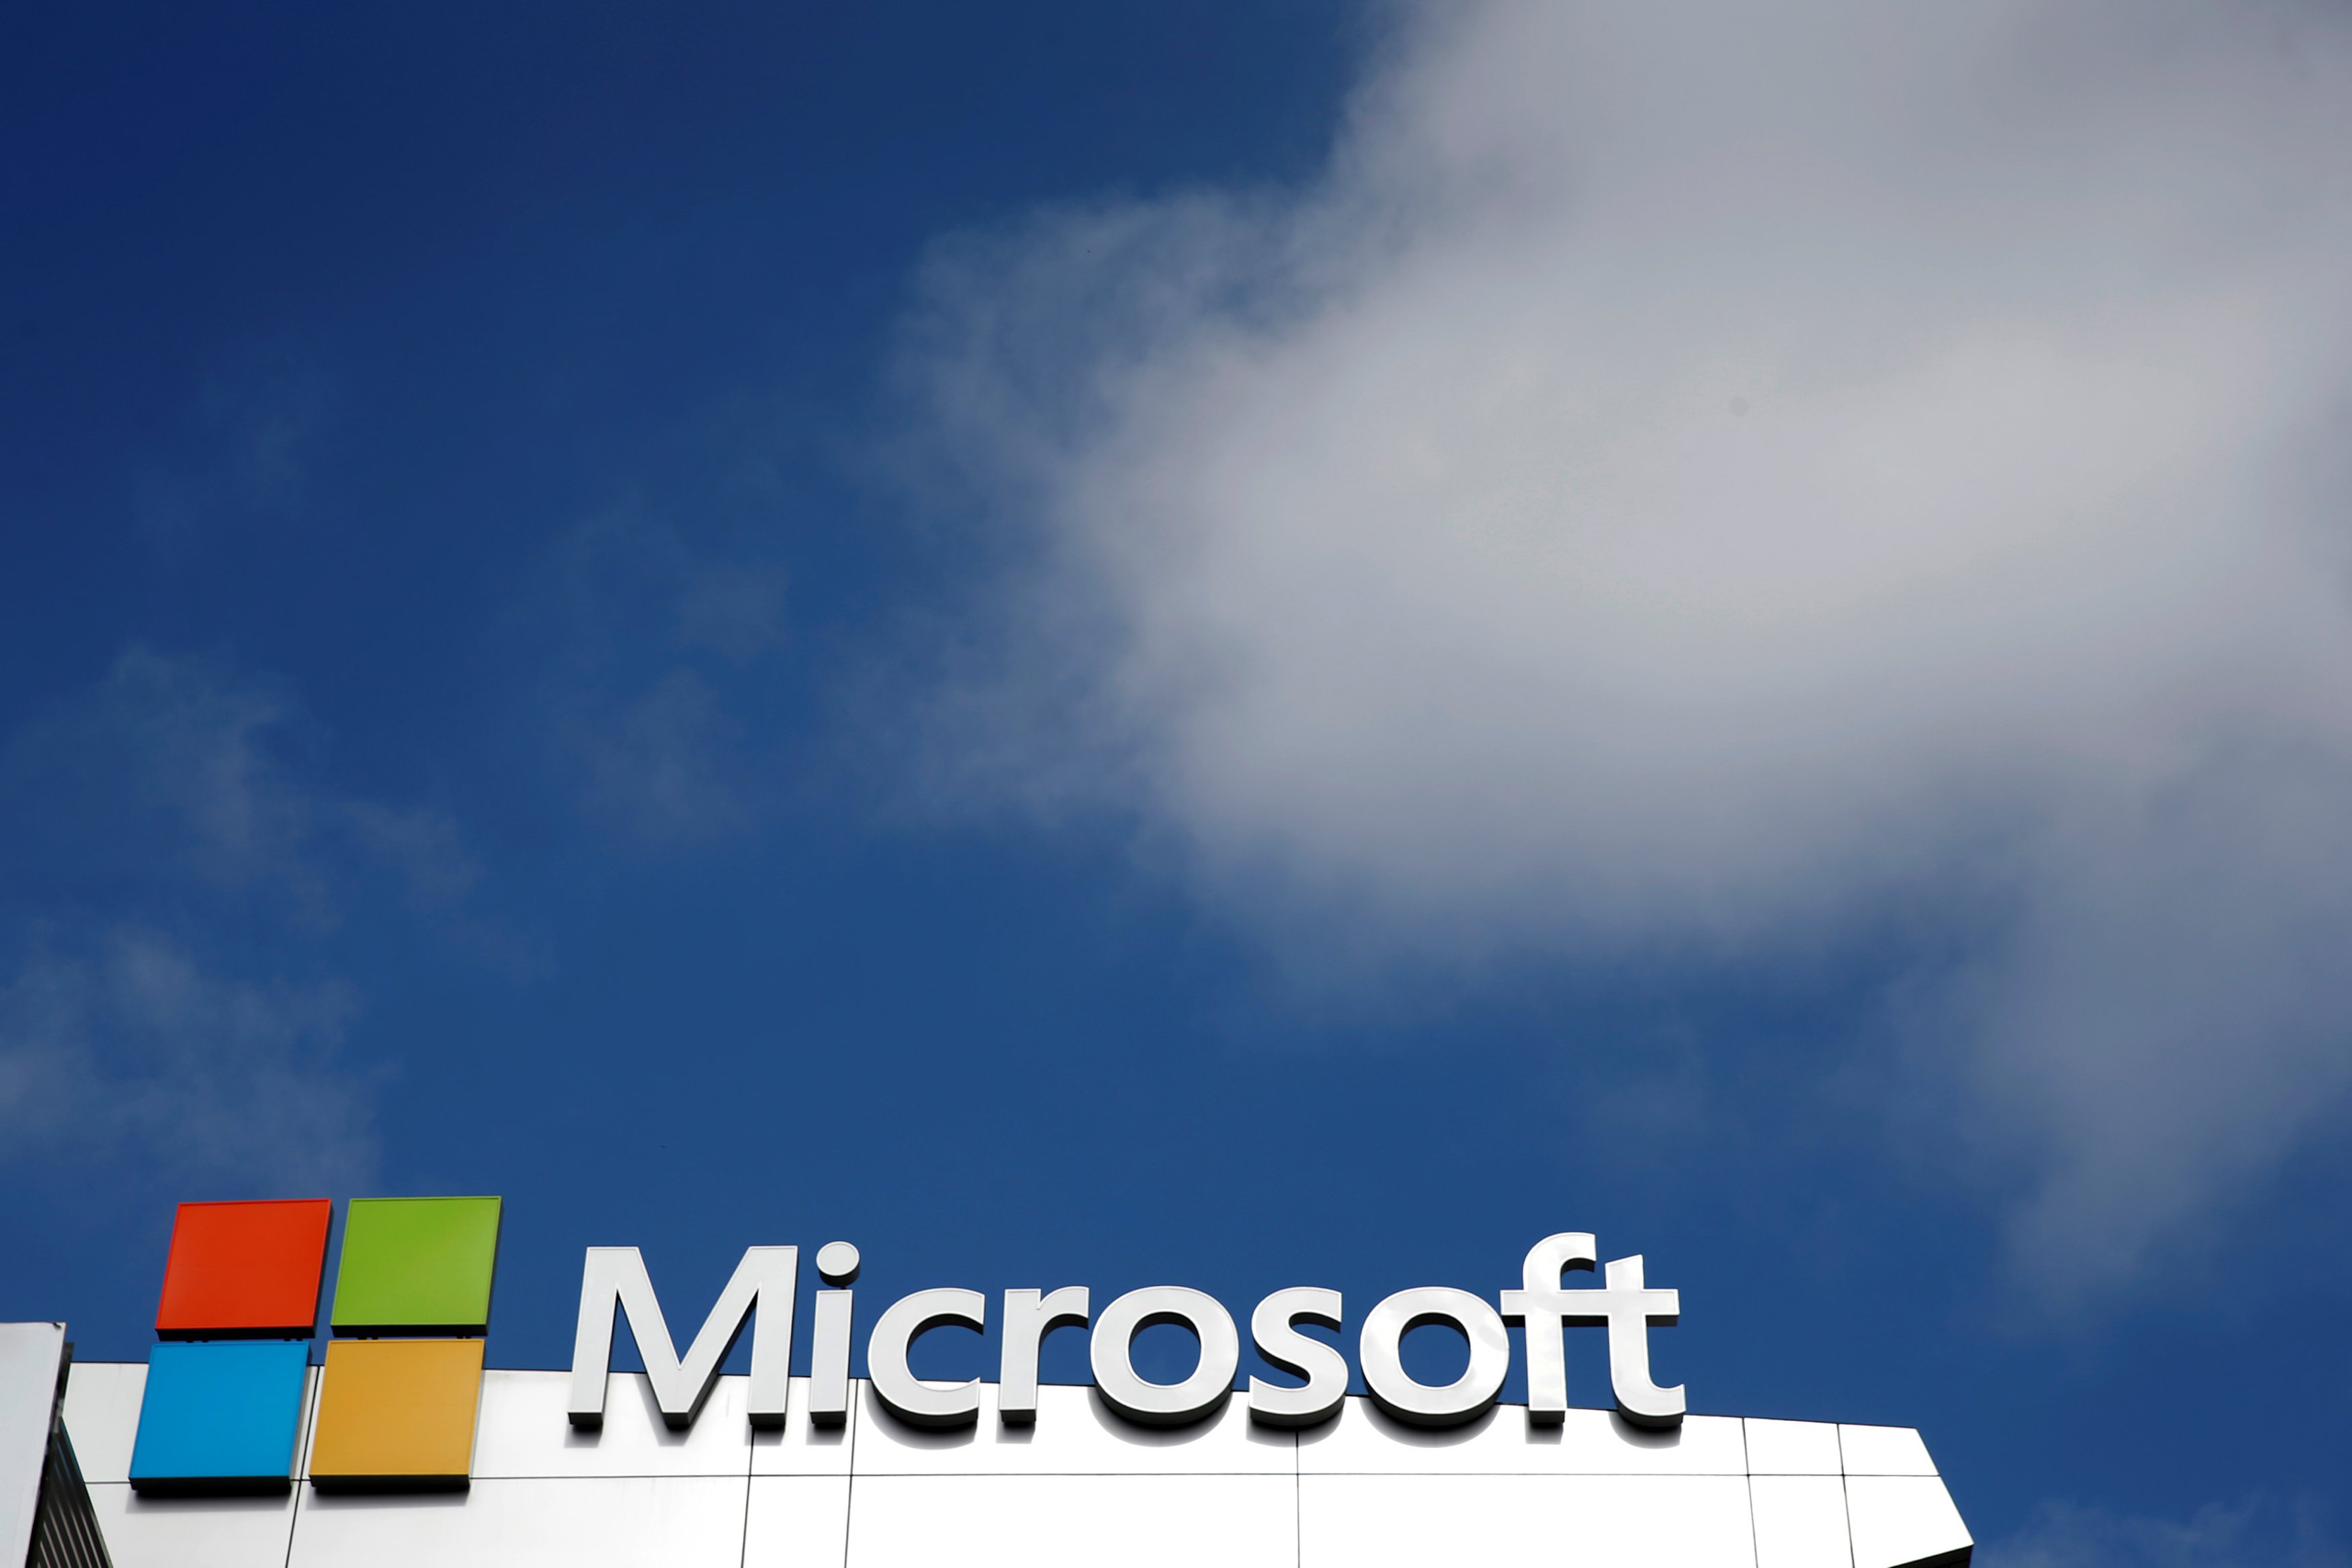 A Microsoft logo is seen next to a cloud the day after Microsoft Corp's $26.2 billion purchase of LinkedIn Corp, in Los Angeles, California